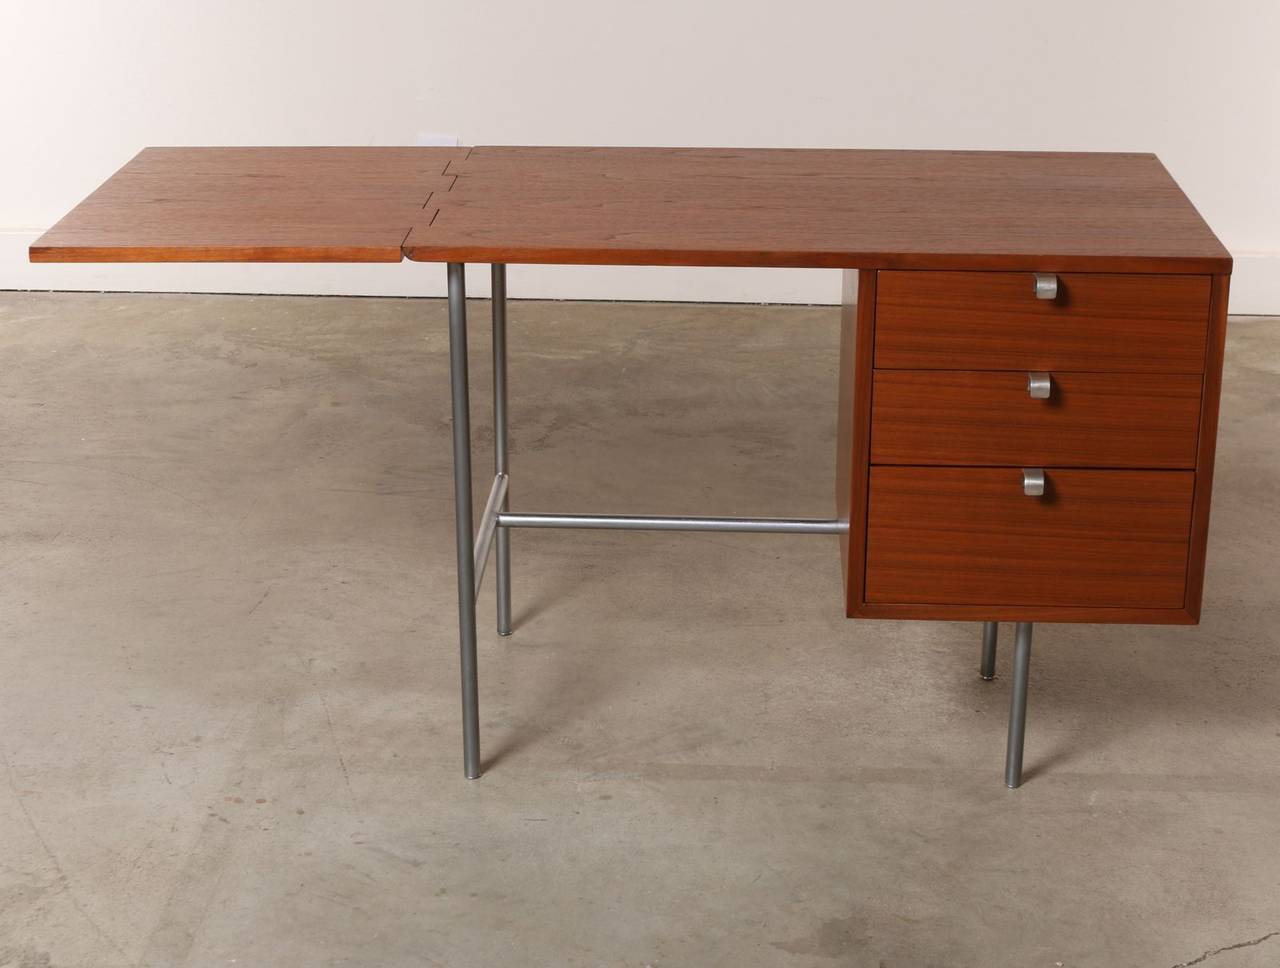 This desk packs a whole lot of style and tremendous functionality in a relatively compact space.  Sought after for it's quality and design, we're thrilled to offer this George Nelson Drop Leaf Desk Model 4754 in excellent original condition. 

The